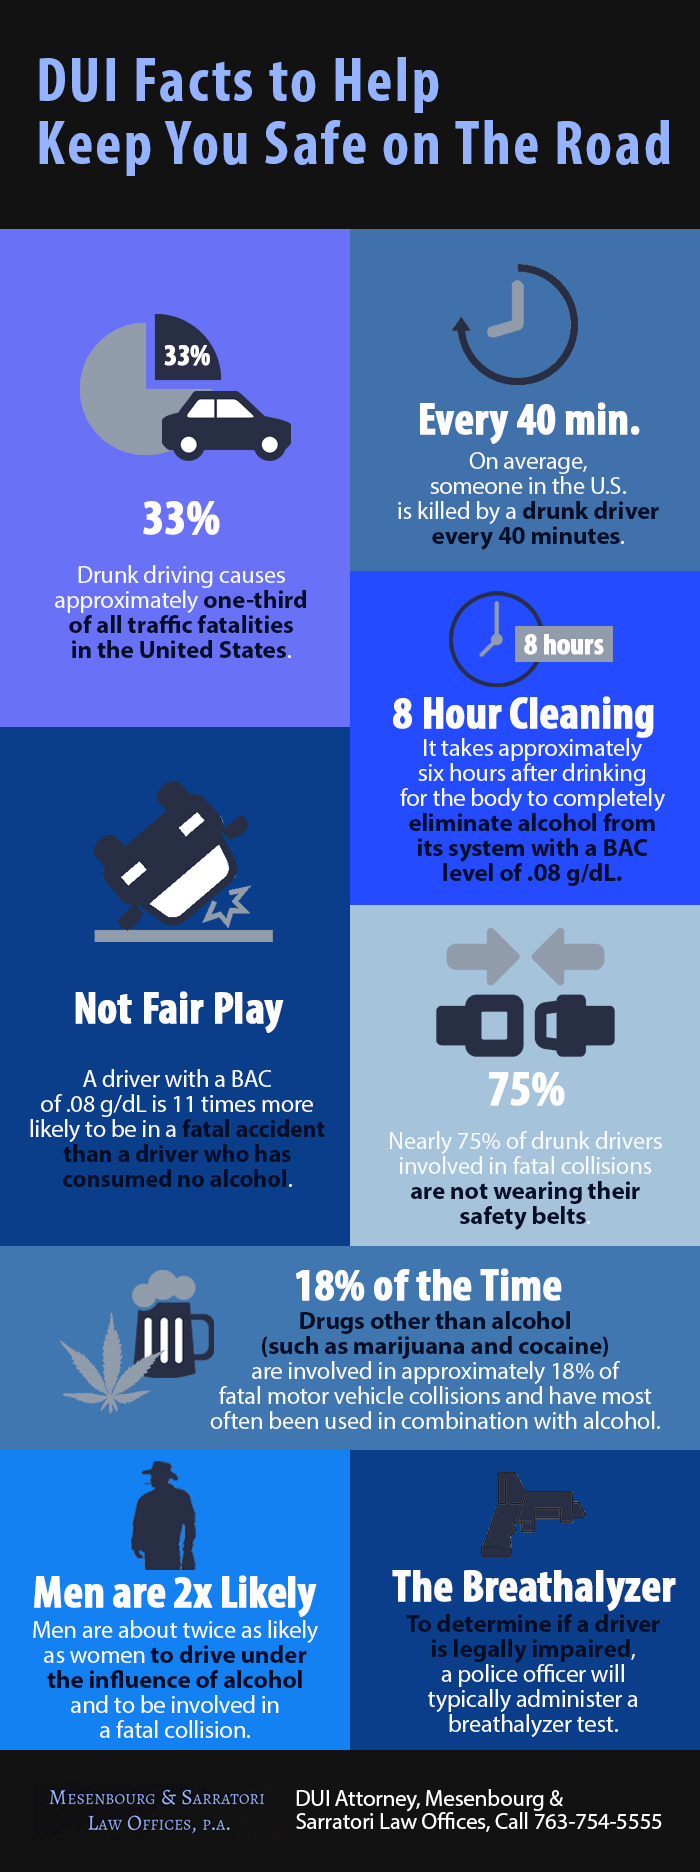 DUI Facts to Help Keep You Safe on The Road | Shared Info Graphics